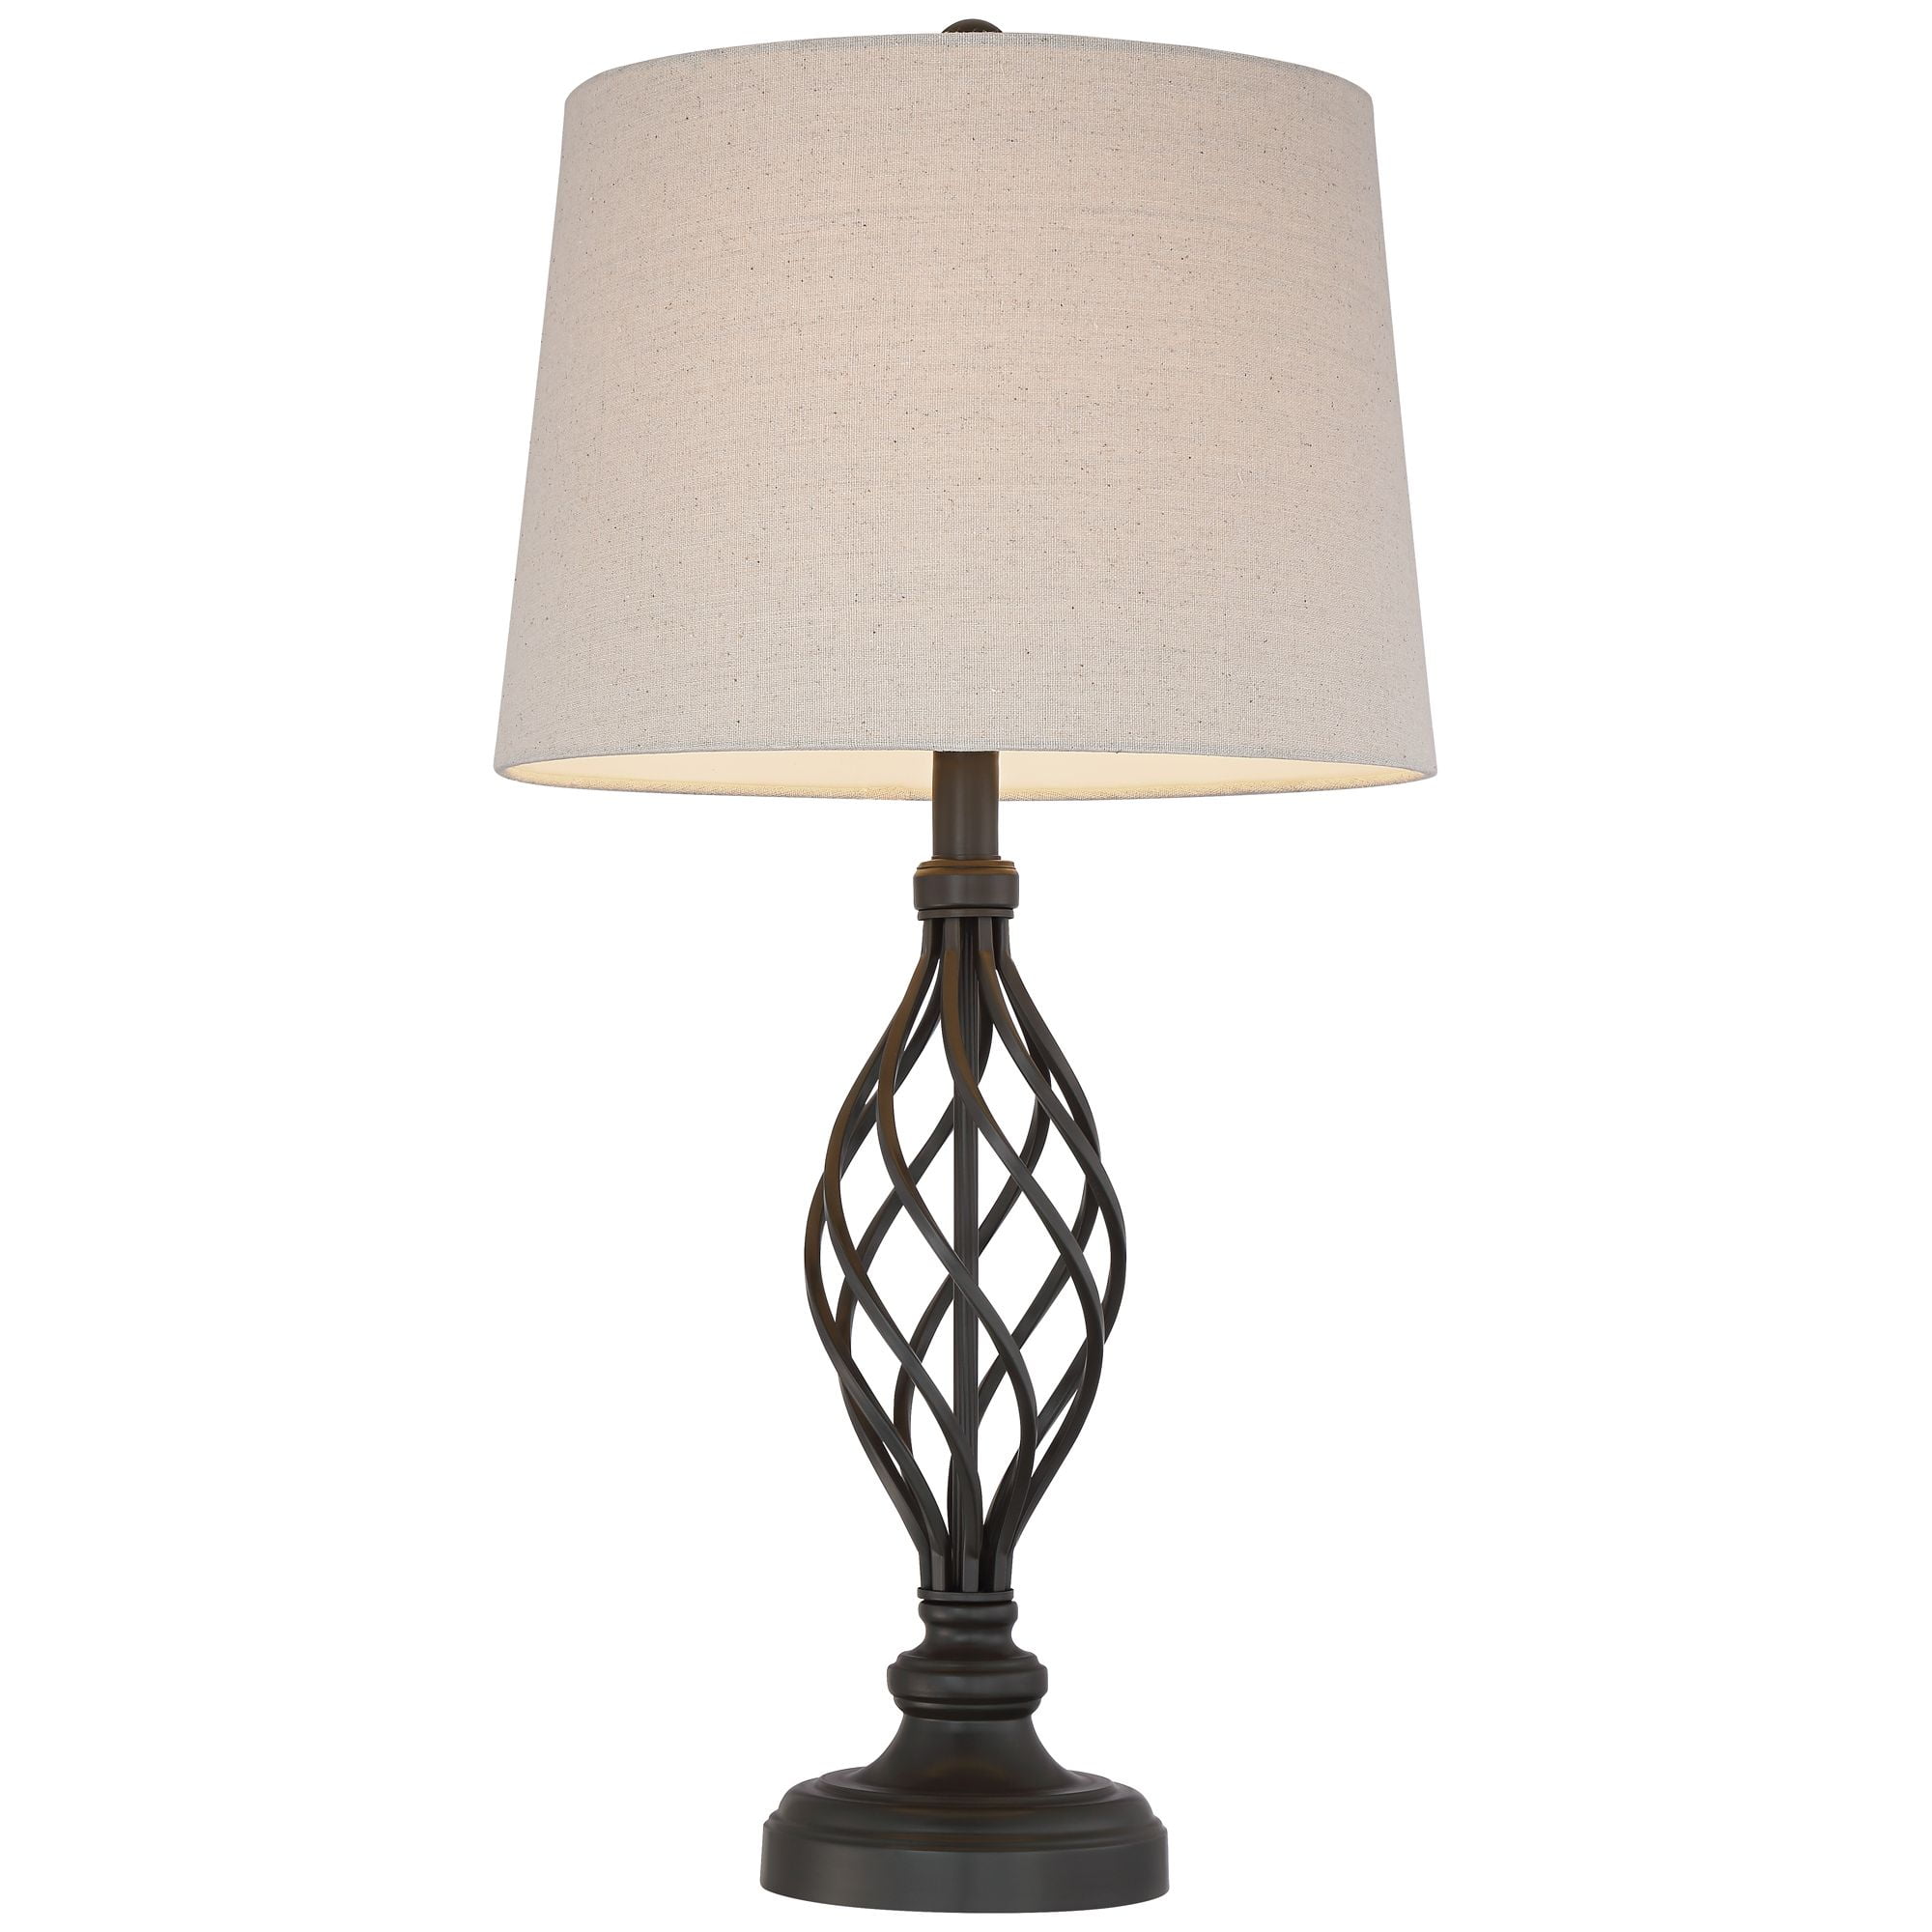 Franklin Iron Works Traditional Table, Scroll Table Lamp